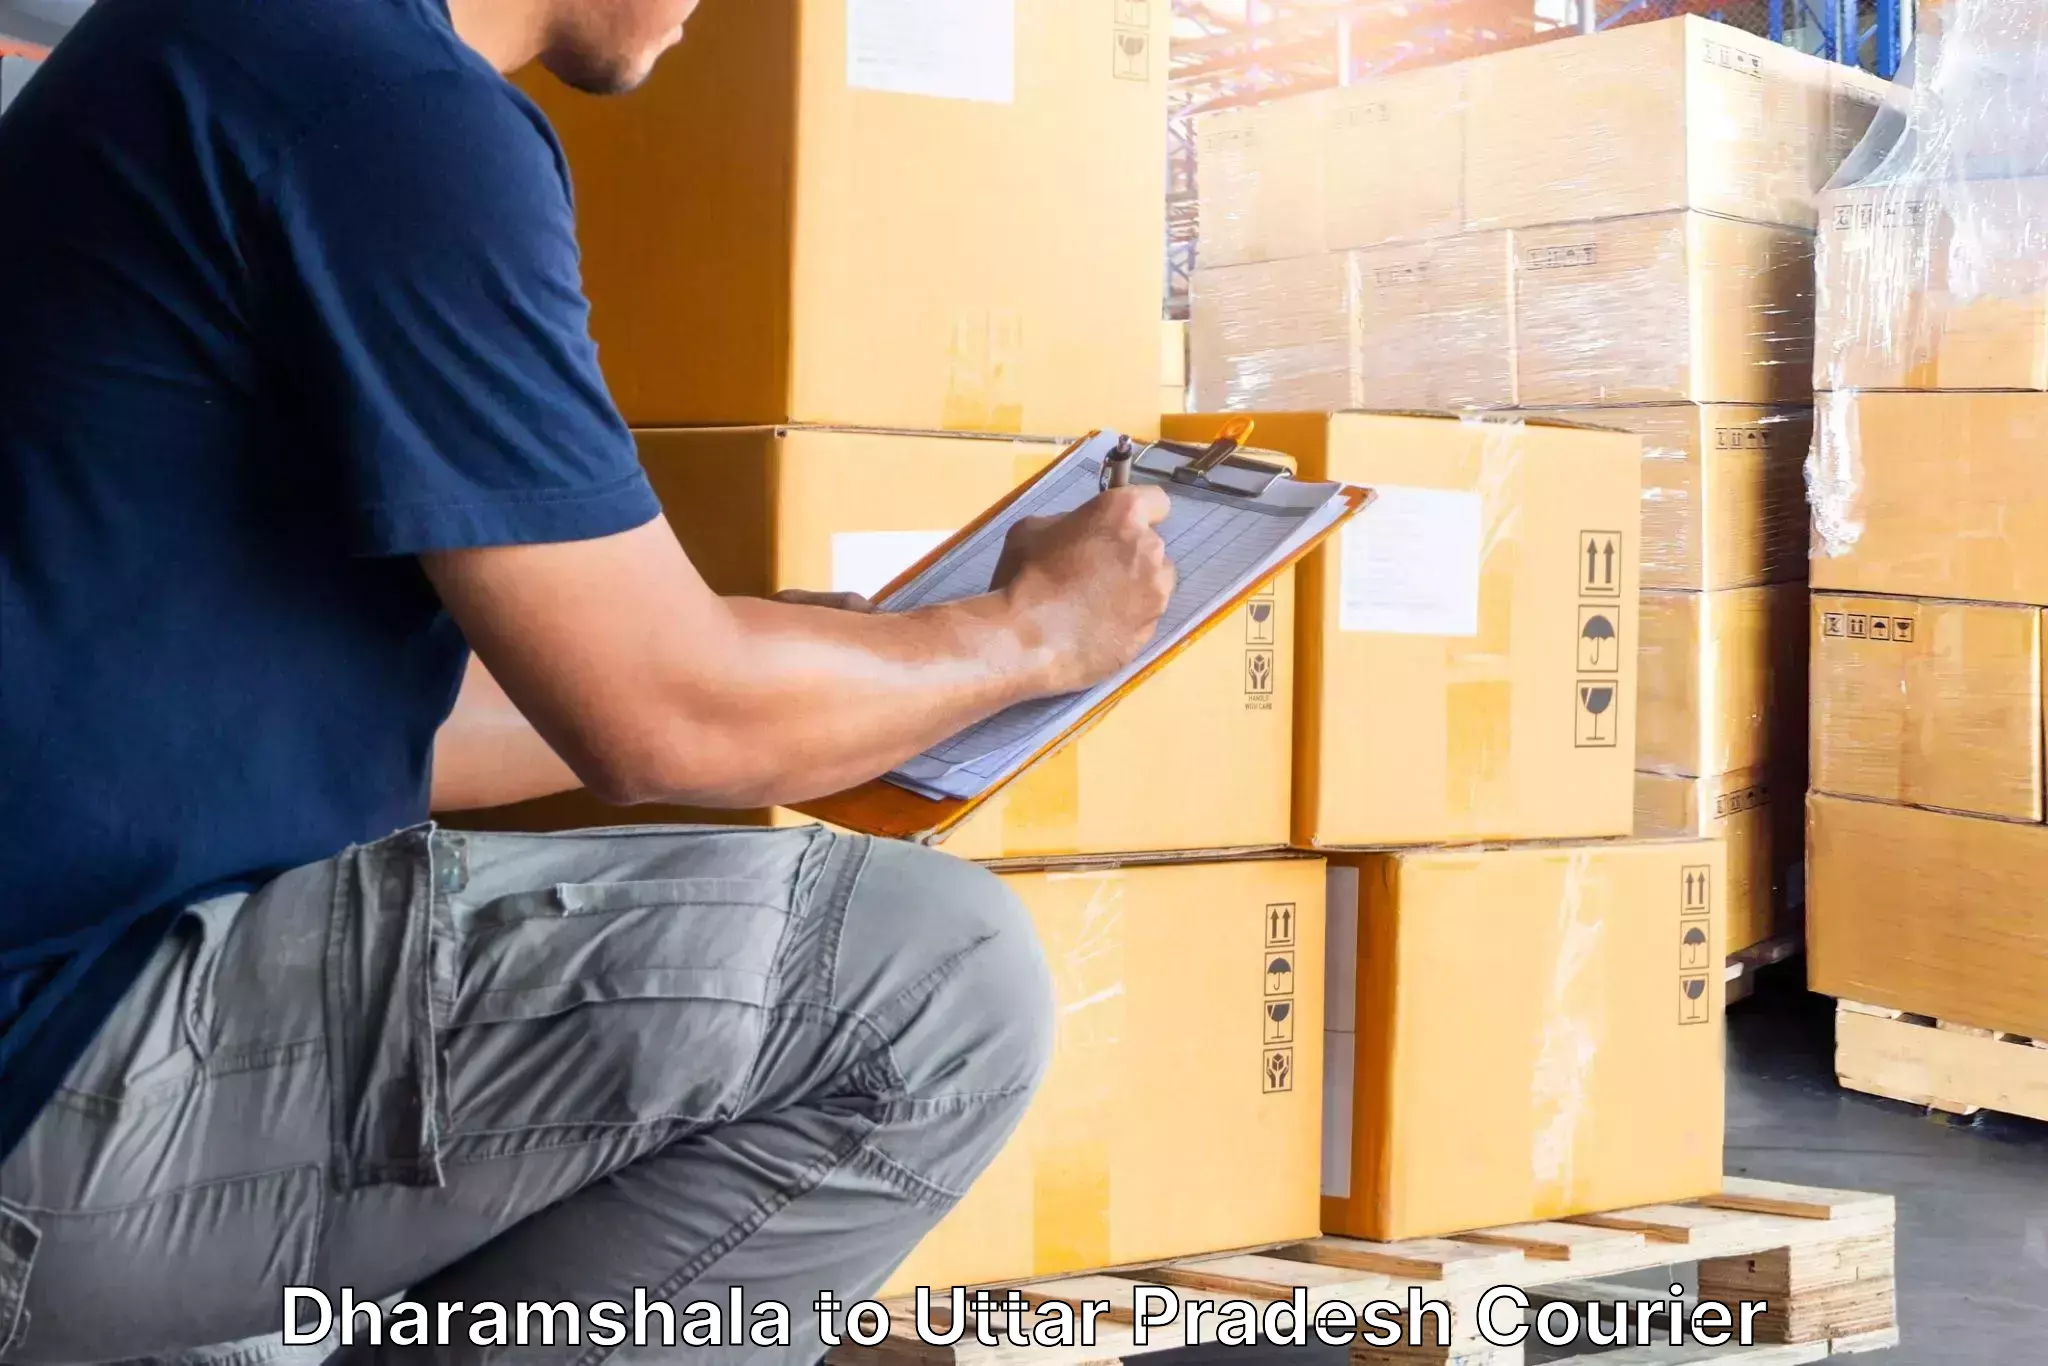 Furniture delivery service Dharamshala to Allahabad